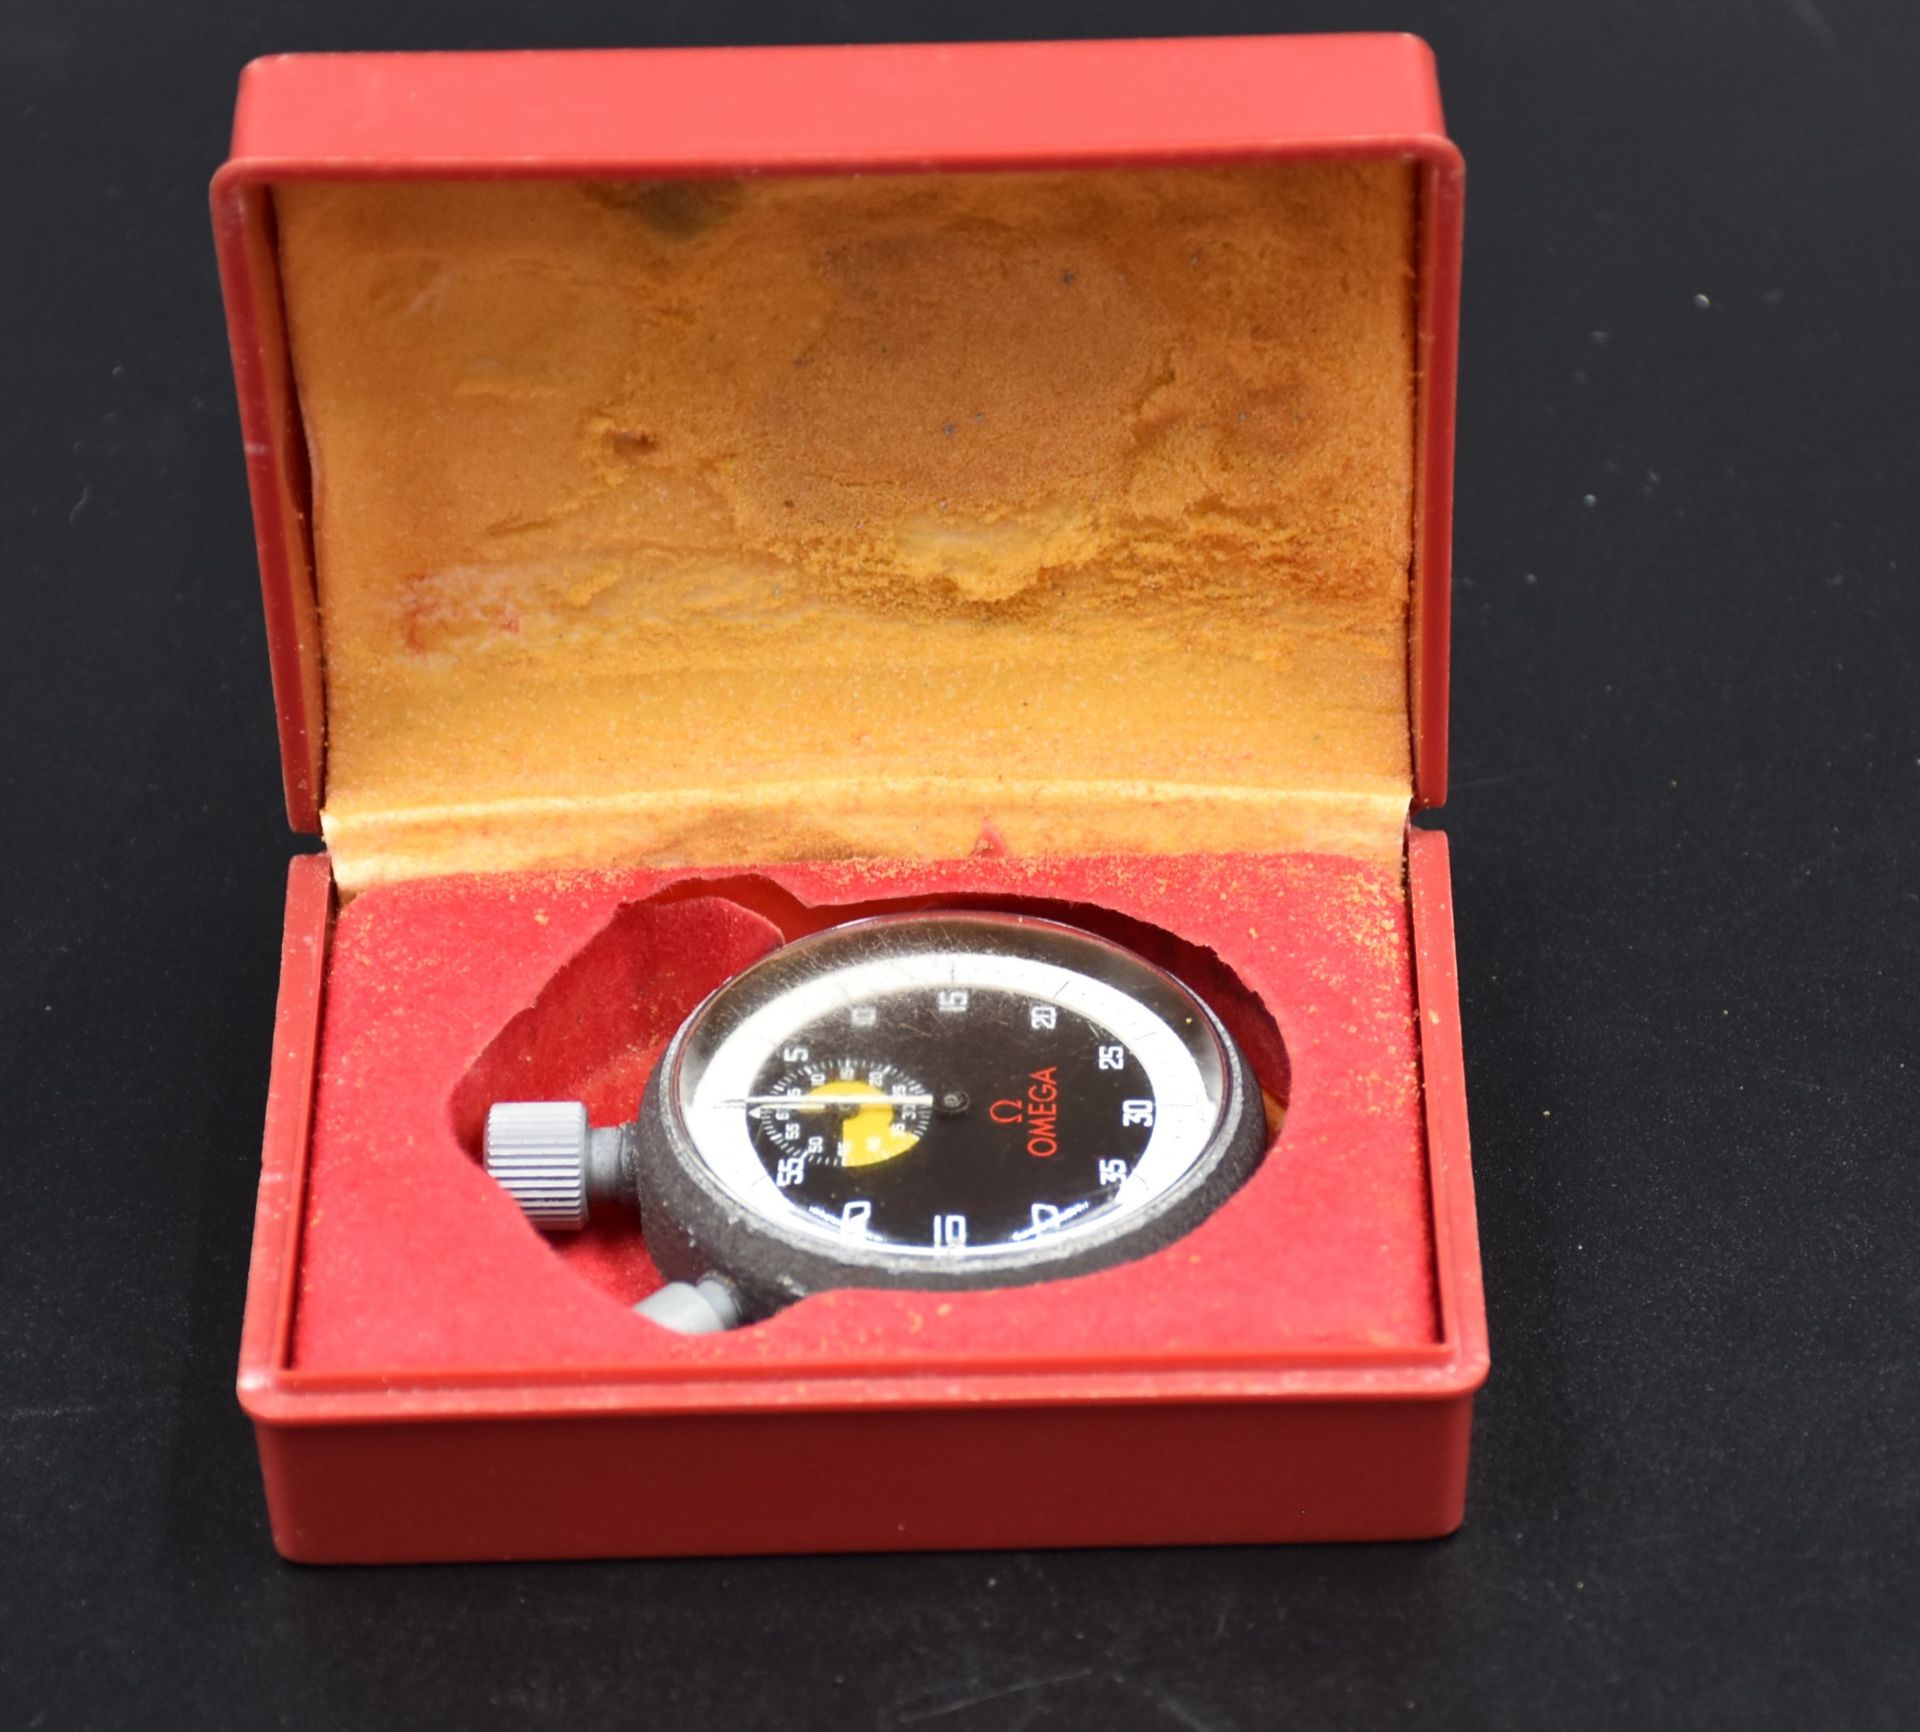 Omega chronometer in its box. Circa 1970. - Image 4 of 4